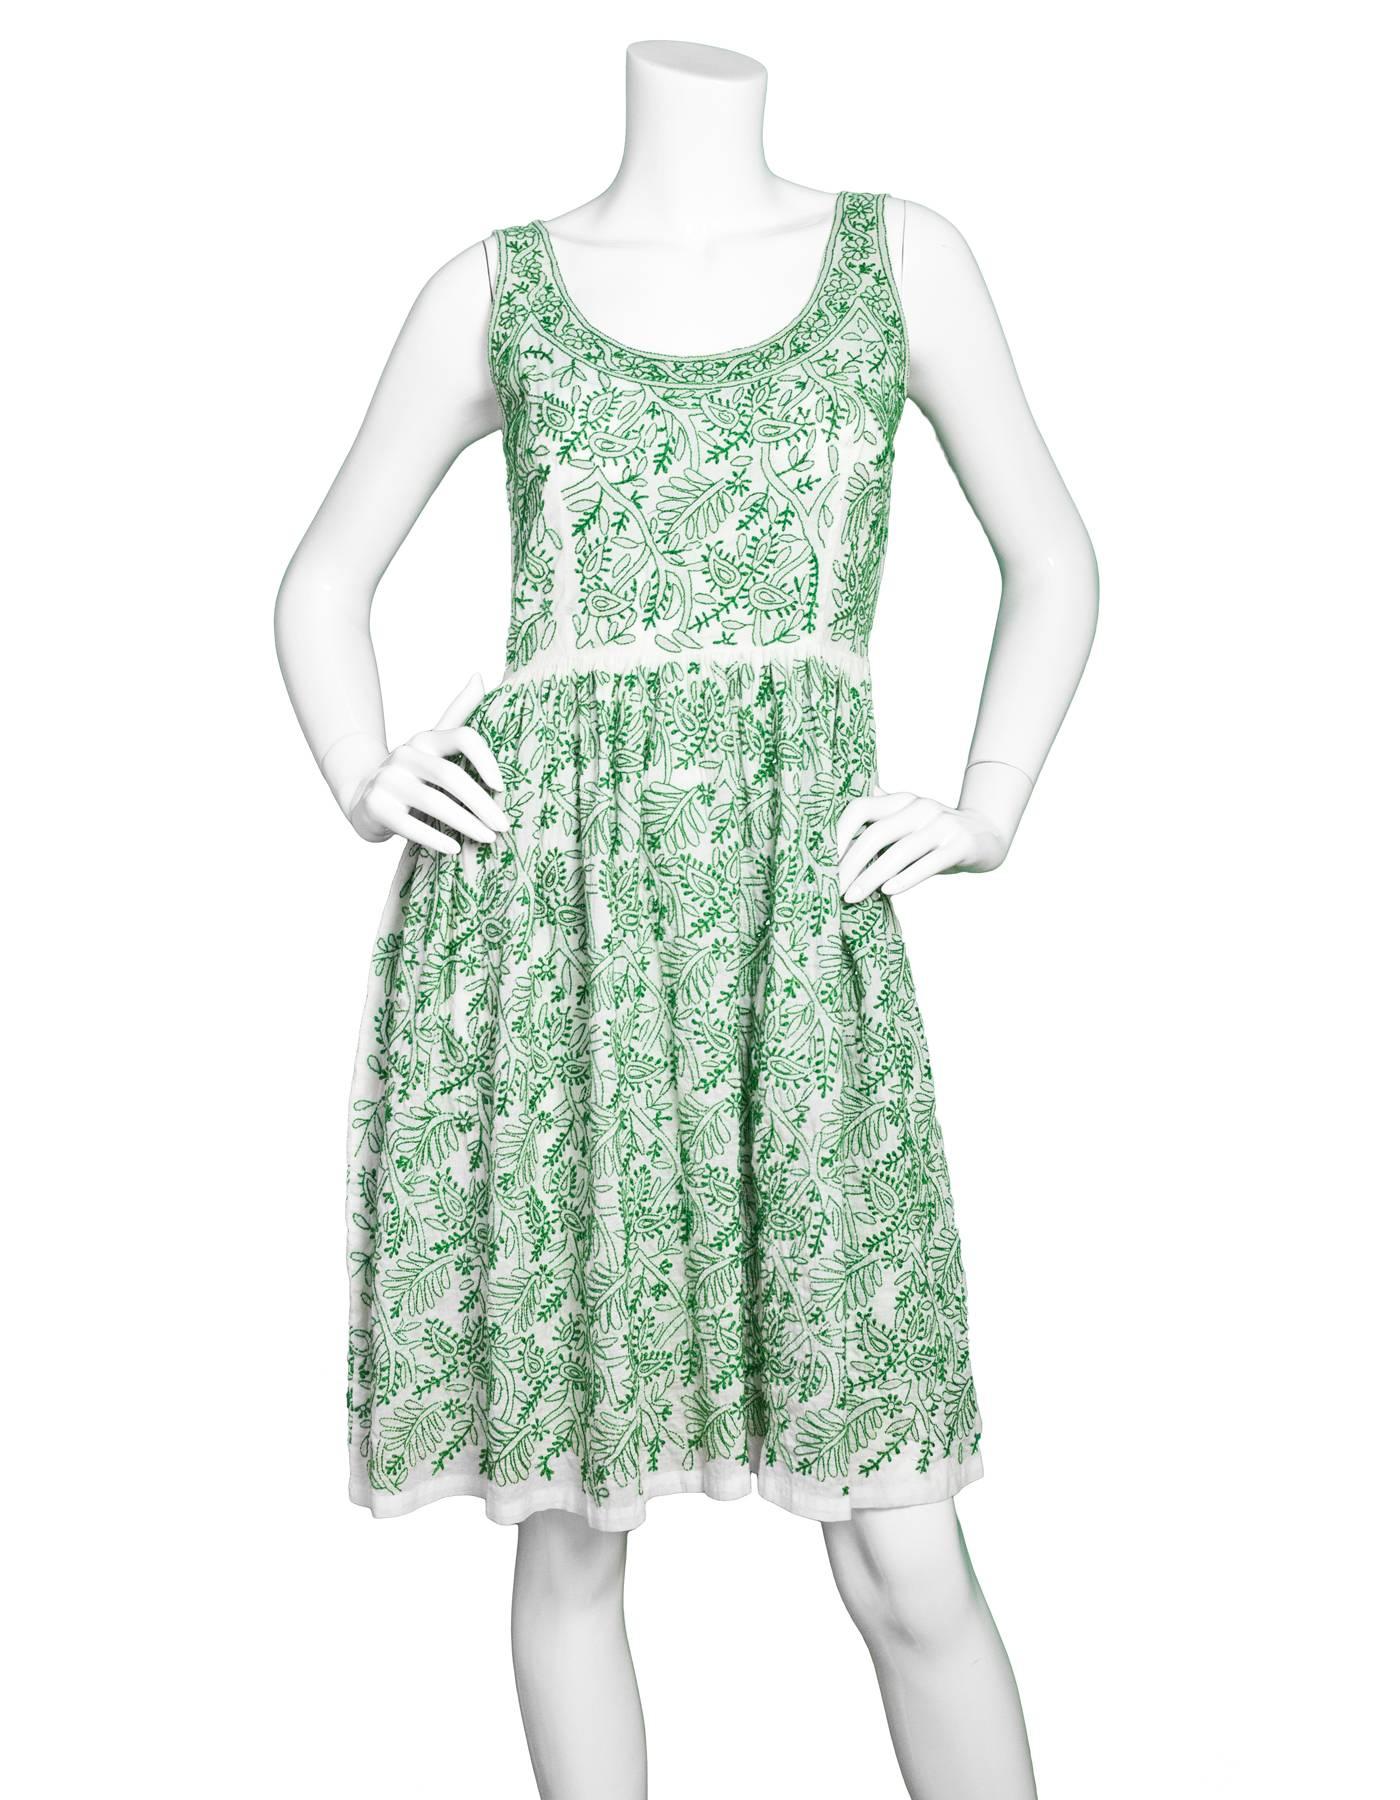 Prada White & Green Embroidered Cotton Sleeveless Dress 
Features floral design embroidered throughout

Made In: India
Color: White and green
Composition: Not given- believed to be 100% cotton
Lining: None
Closure/Opening: Side zipper 
Exterior